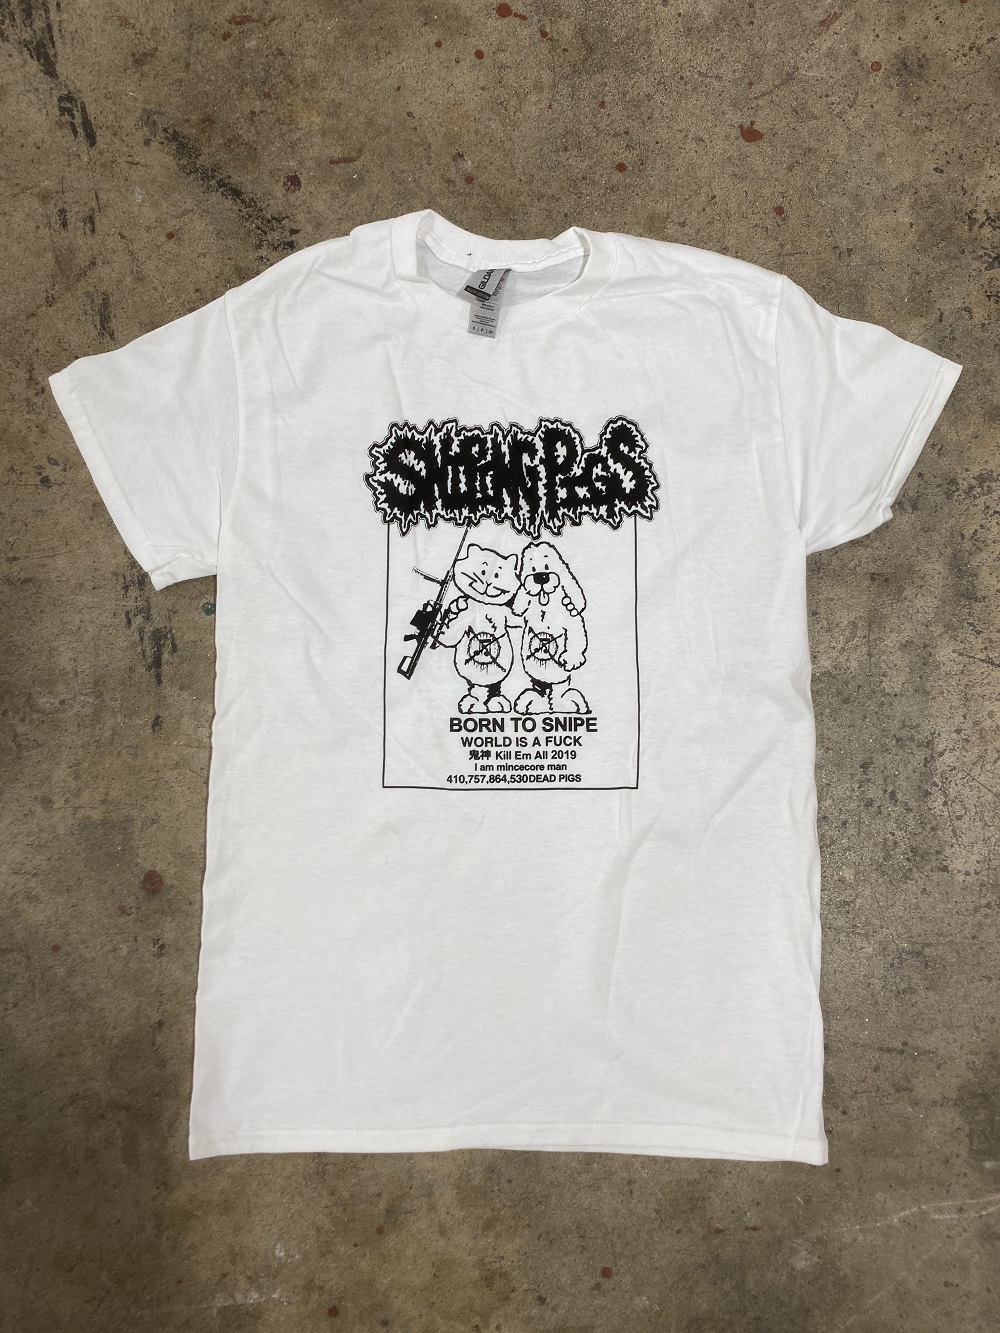 Sniping Pigs - Born To Snipe Shirt (XL)